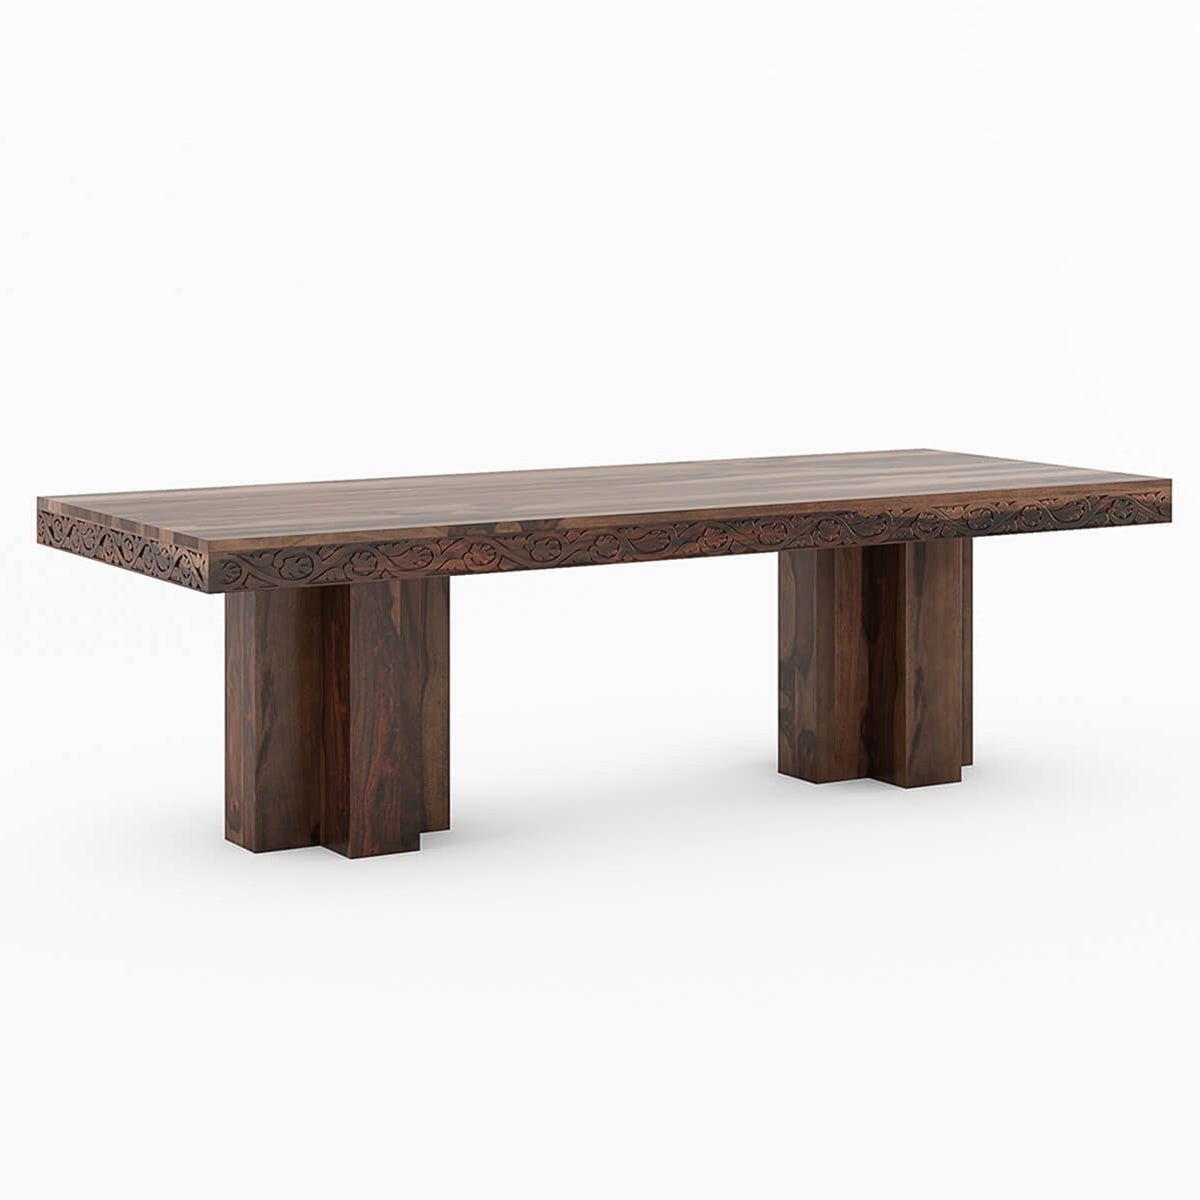 Dallas Ranch Rustic Solid Wood Double Pedestal Large Dining Table